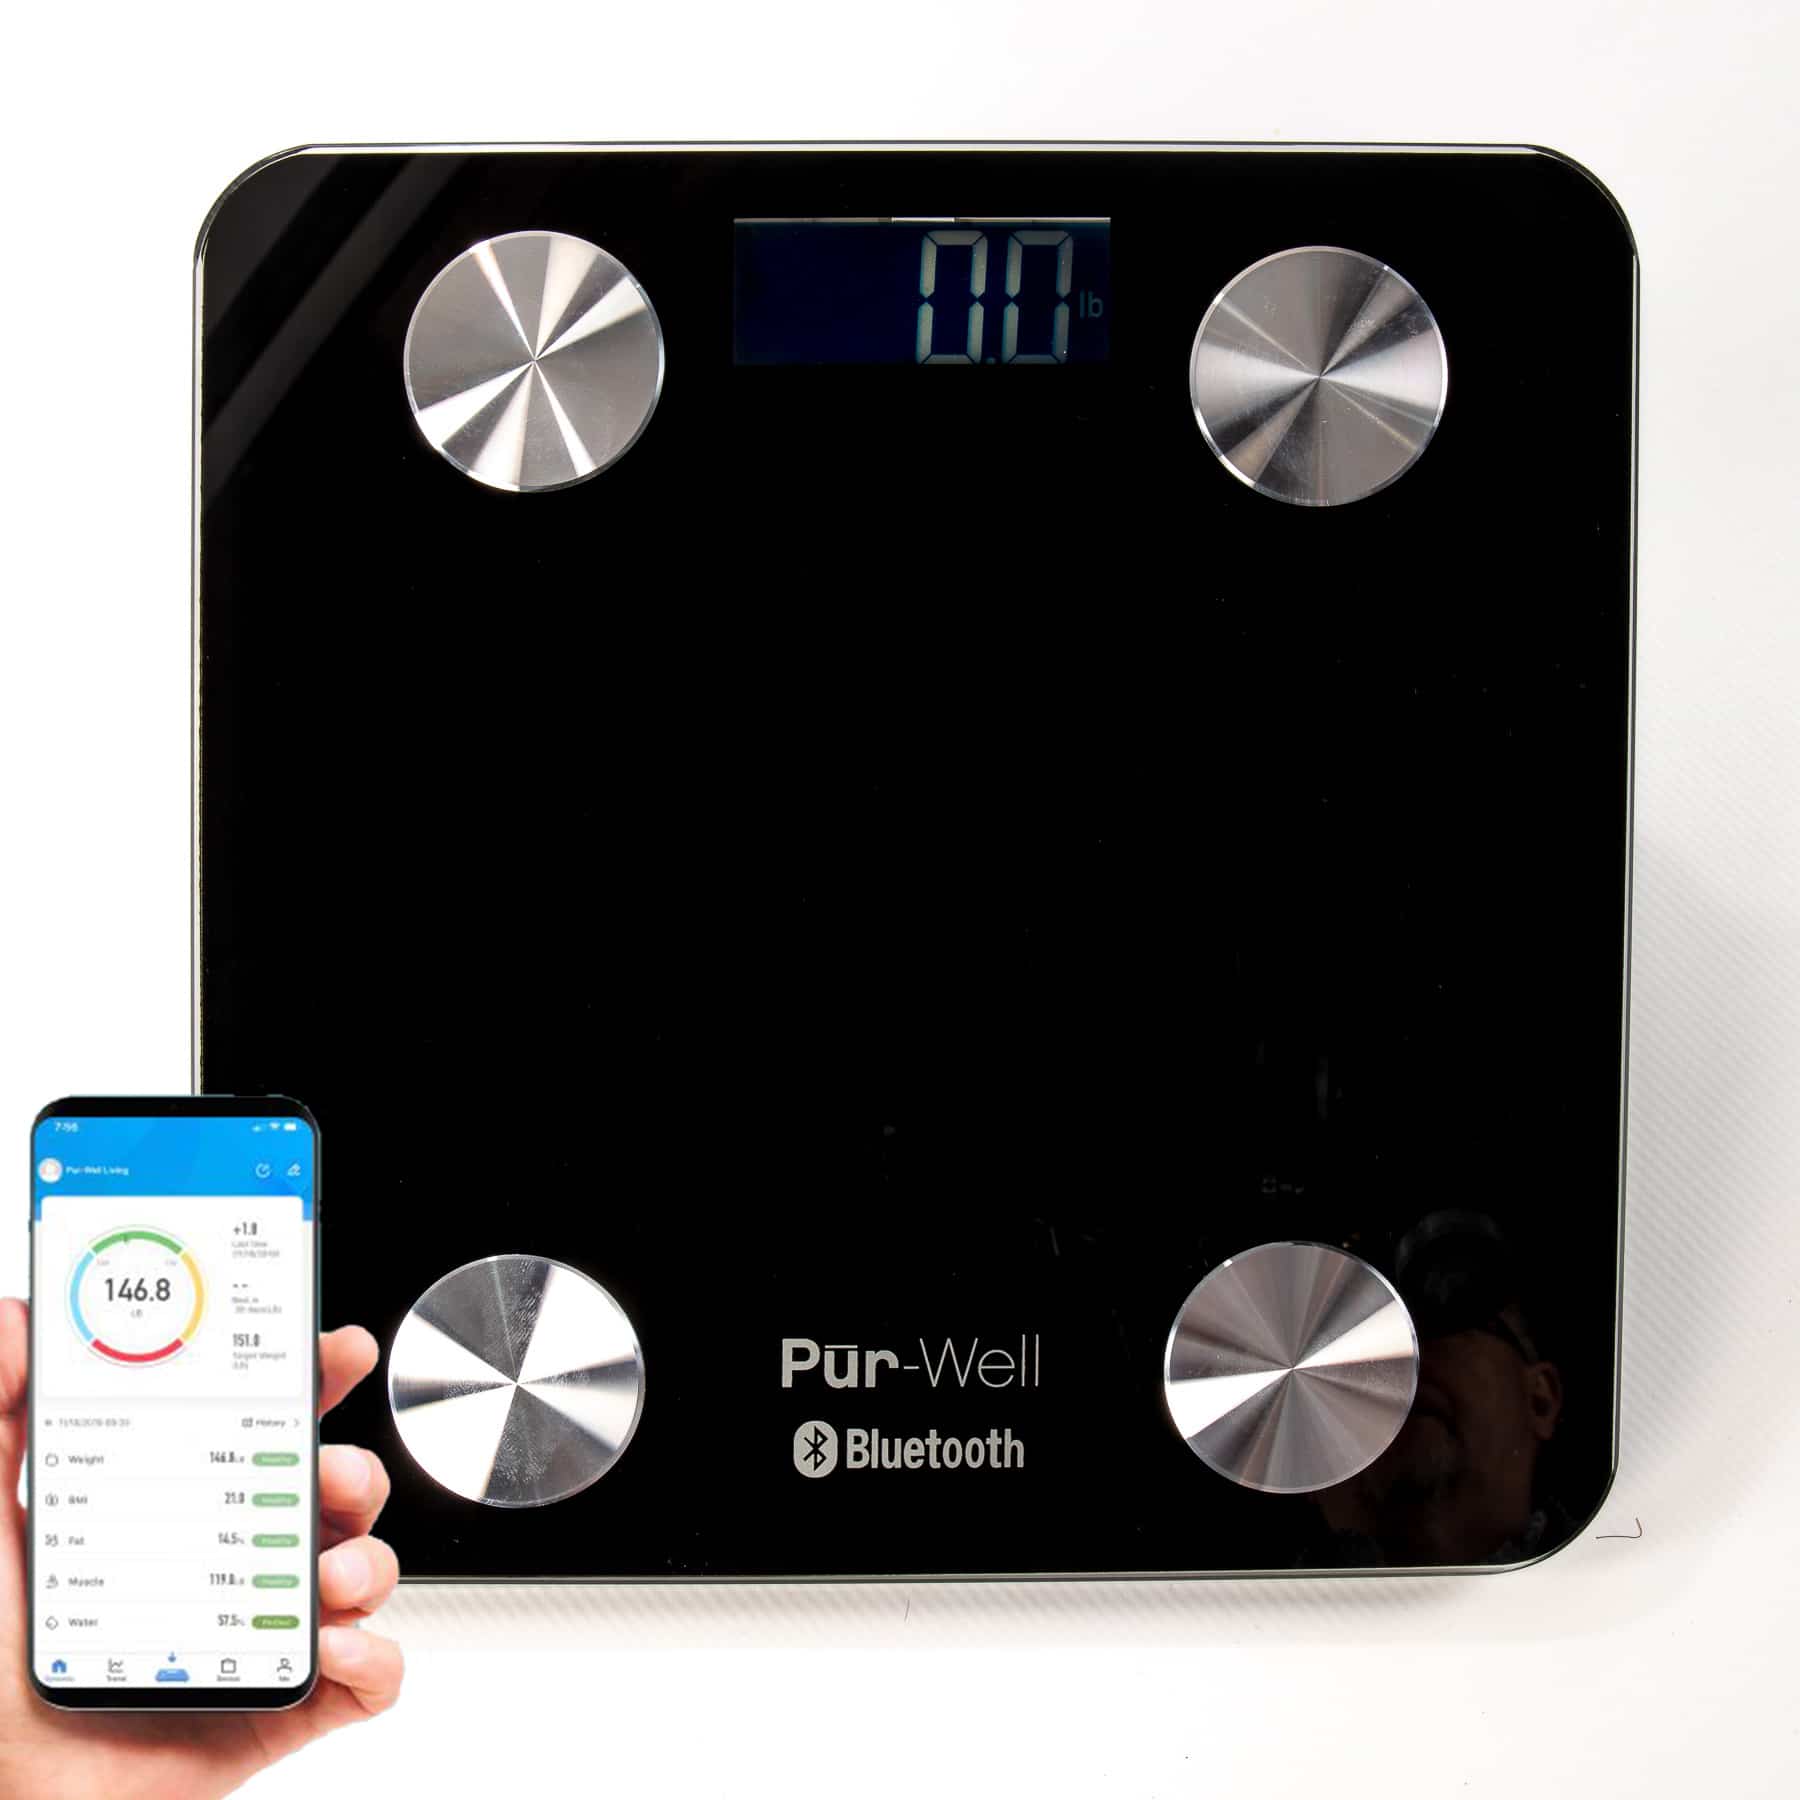 Smart Fitness Bathroom Scale (Weight and Body Fat Scale) – Pur-Well Living